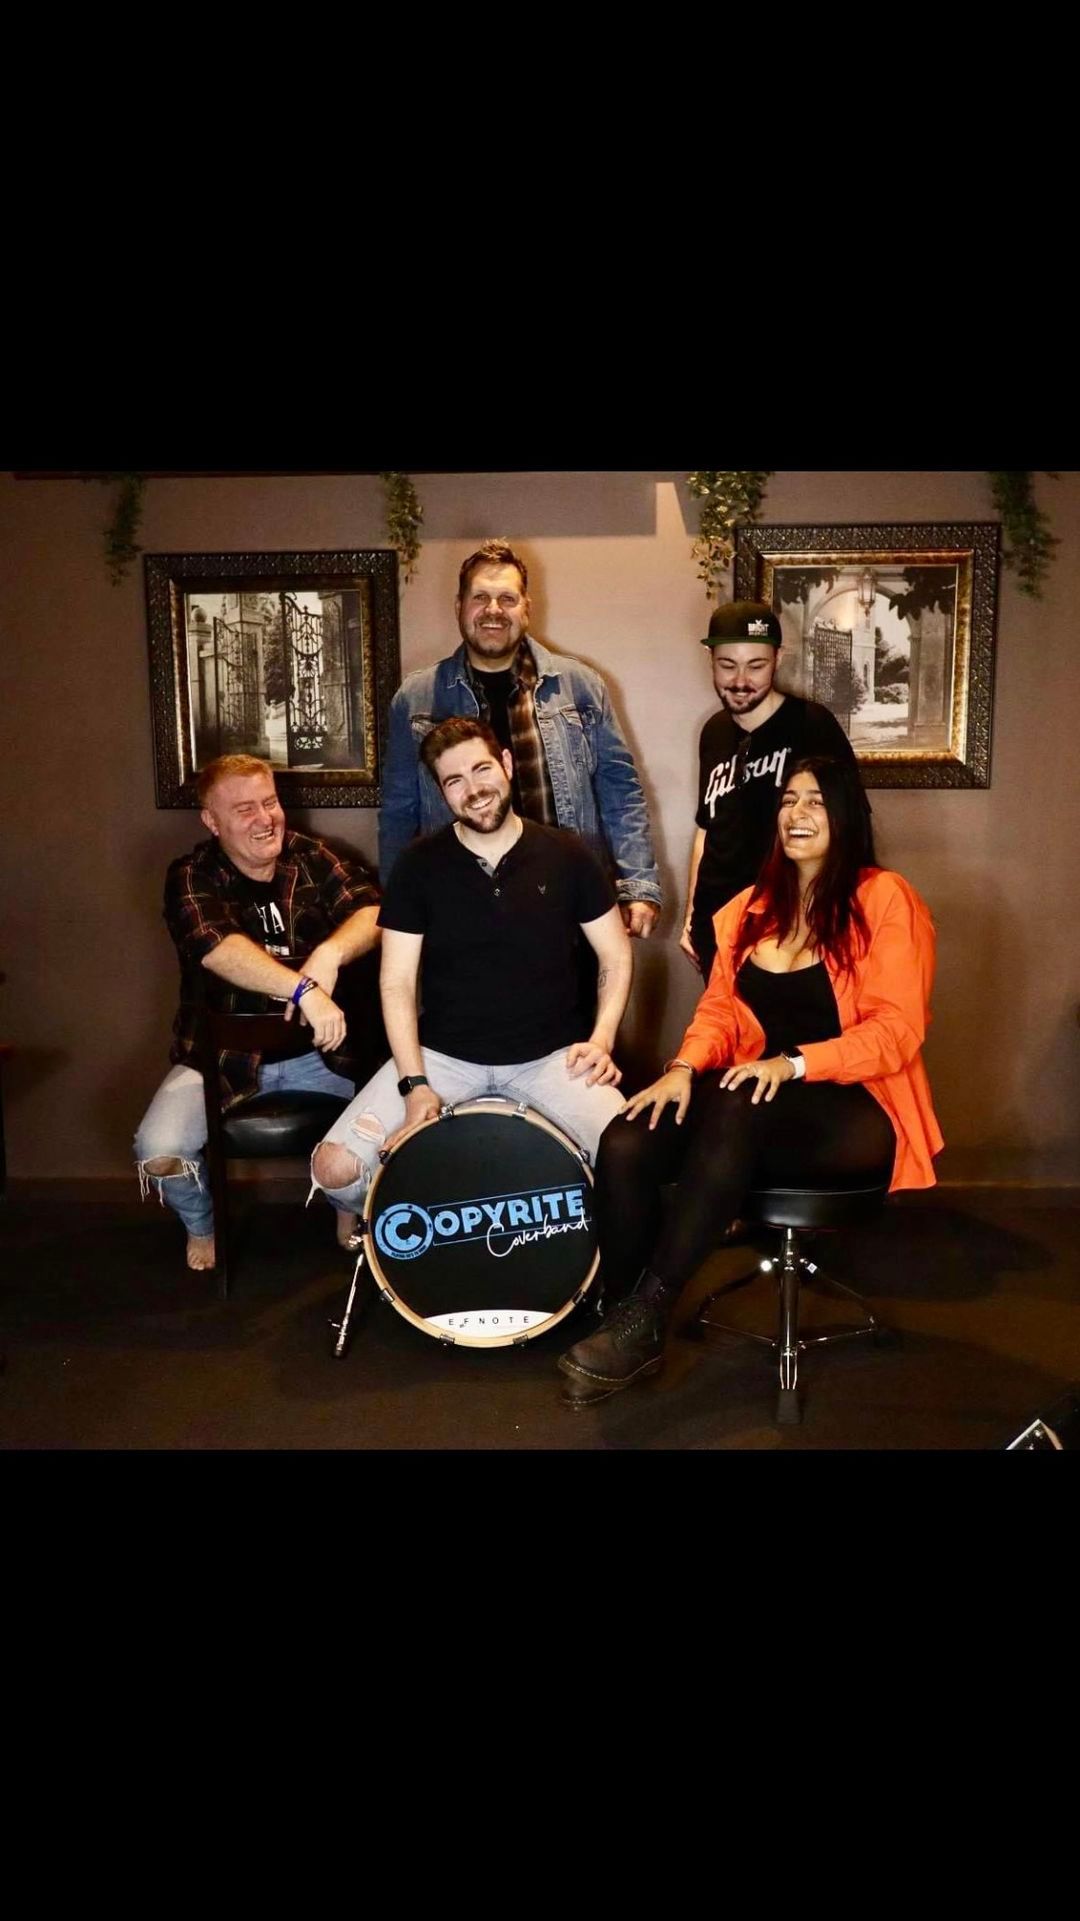 Copyright Coverband performing a great variety of hits from The 80\u2019s 90\u2019s to now